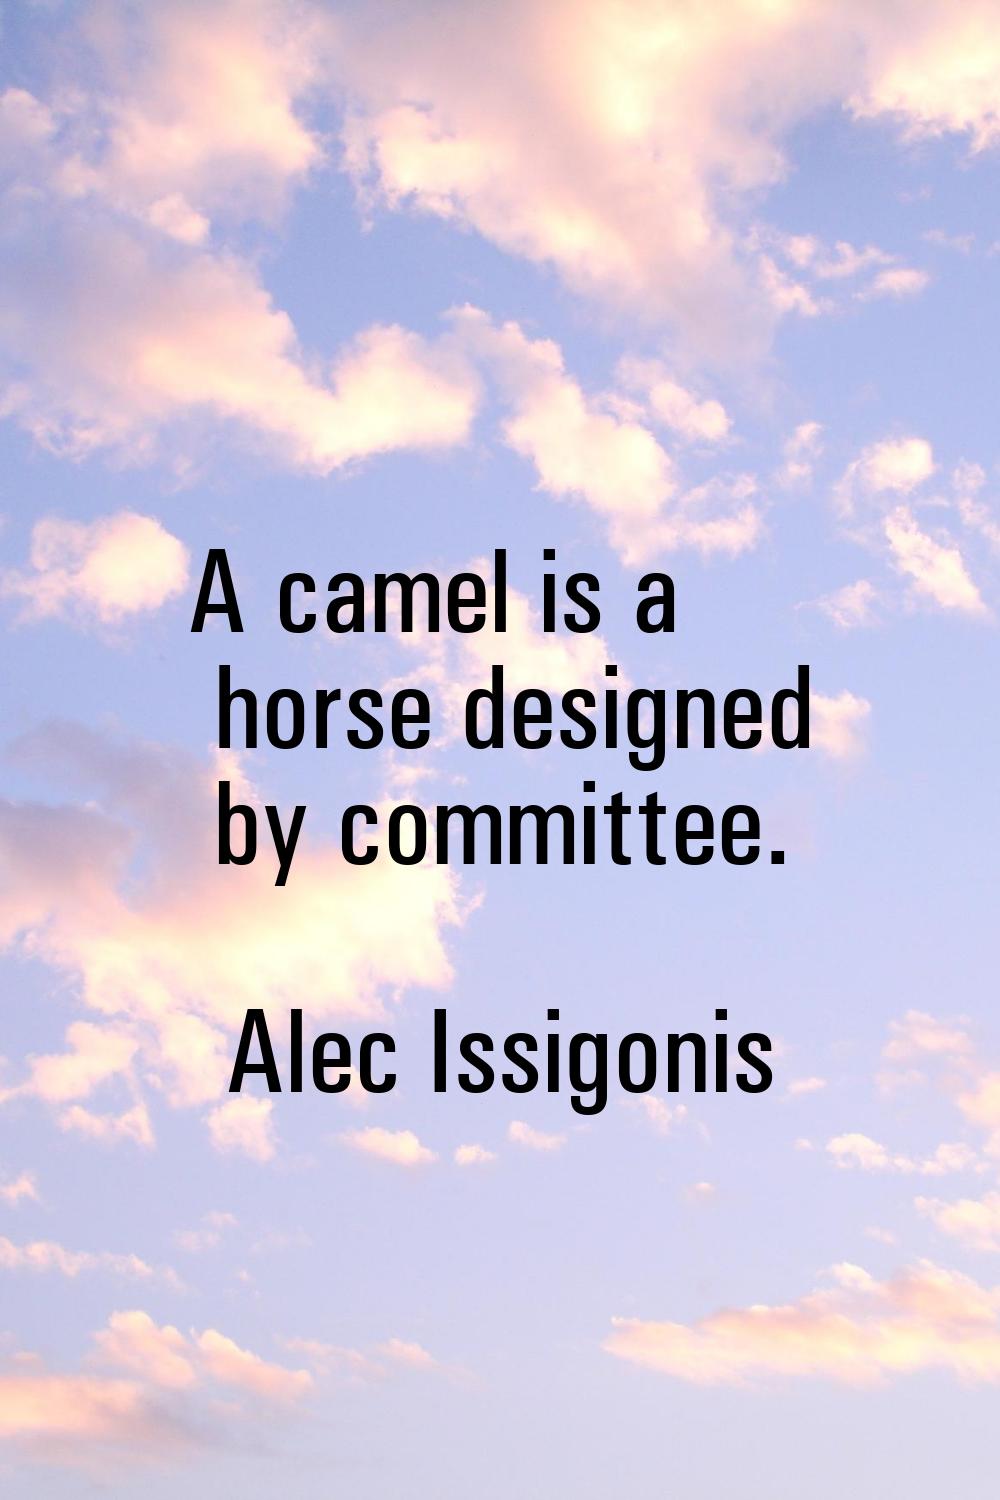 A camel is a horse designed by committee.